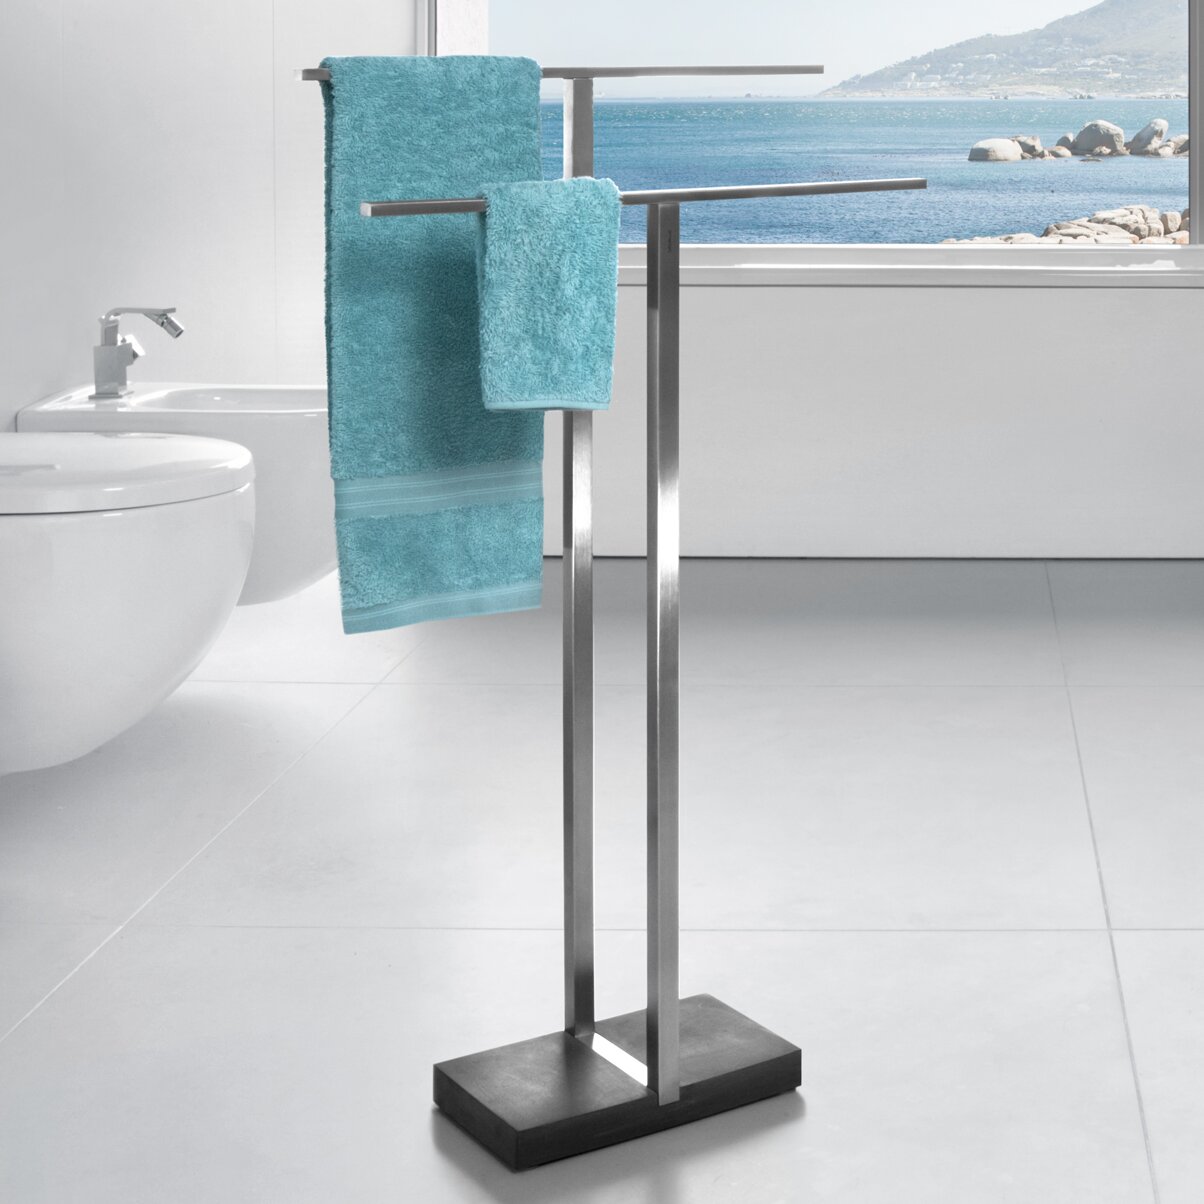 Menoto Steel Polished Free Standing Stainless Towel Stand & Reviews Stainless Steel Towel Rack Free Standing